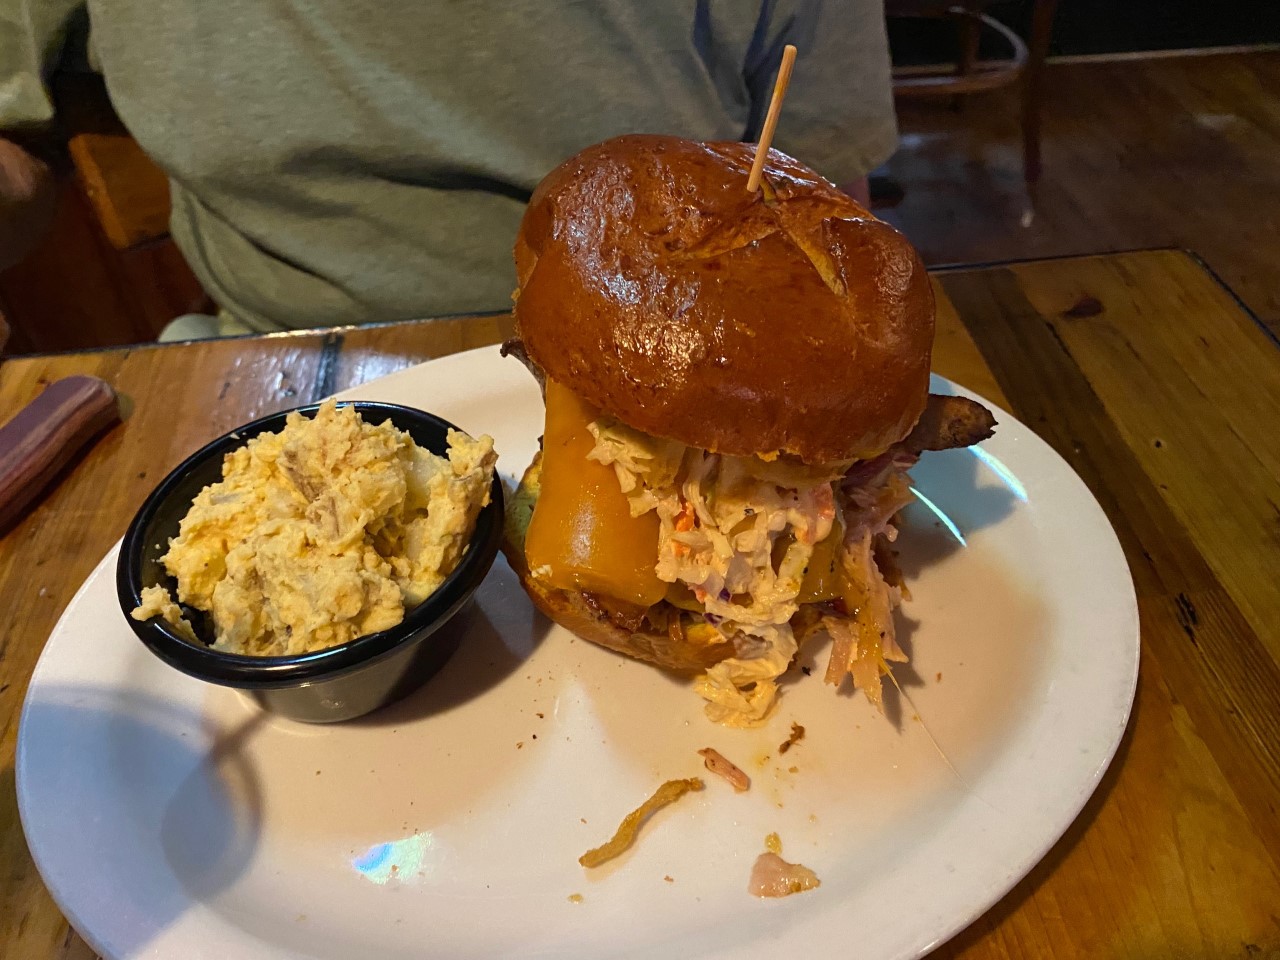 The Sloppy Pig at Front Range Barbeque was featured on Diners, Drive-ins and Dives.